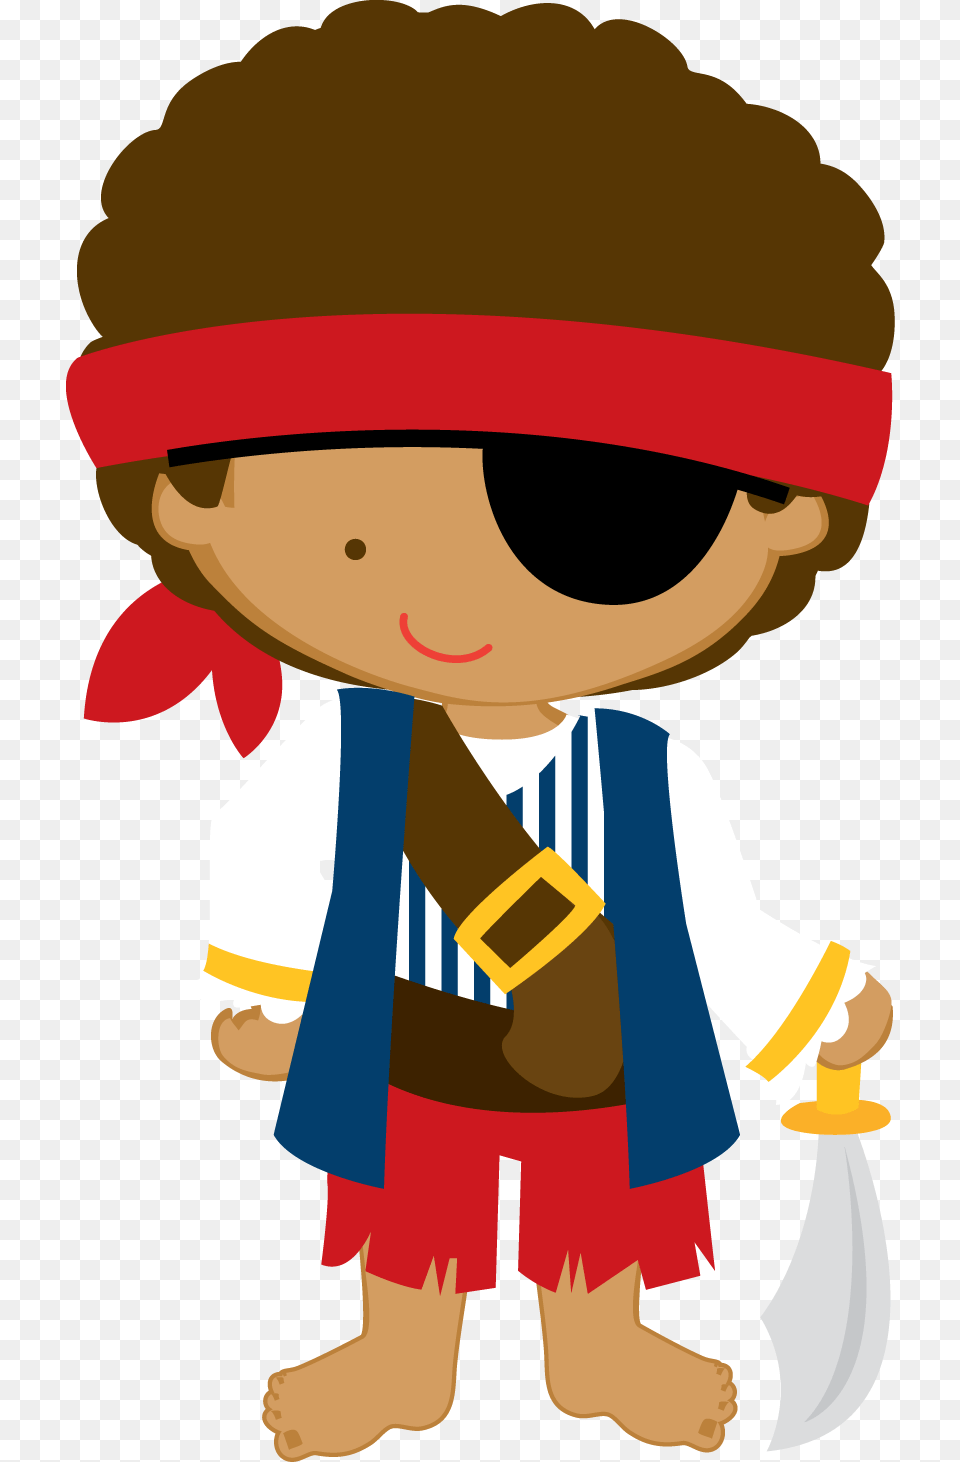 Pirate Clip Art Pirate Party Pirate Kids Pirate Minus Clipart Pirate, People, Person, Baby, Face Png